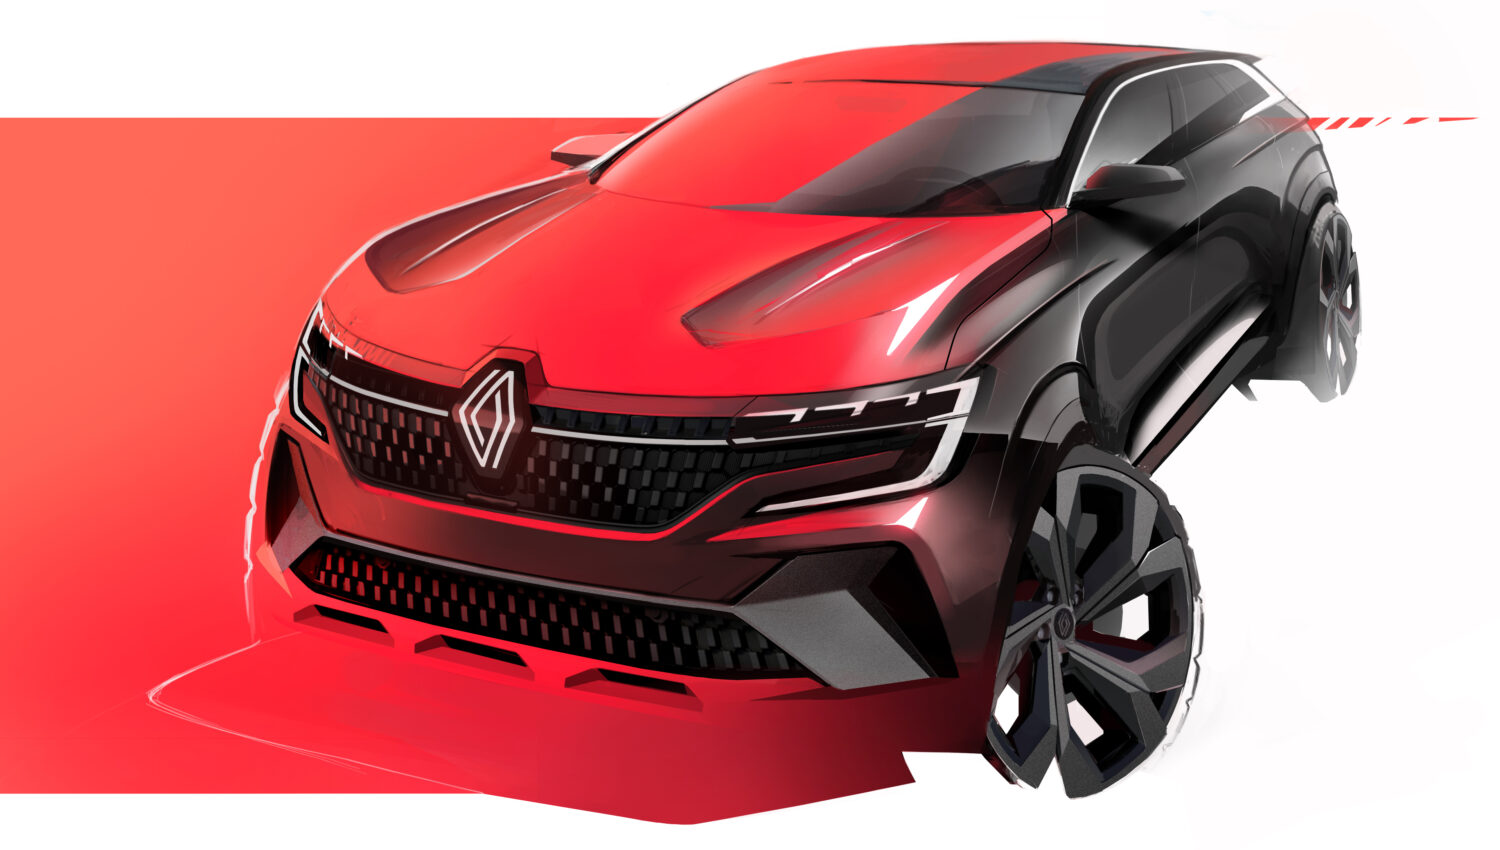 2022 - All-New Renault Austral an athletic and technological SUV